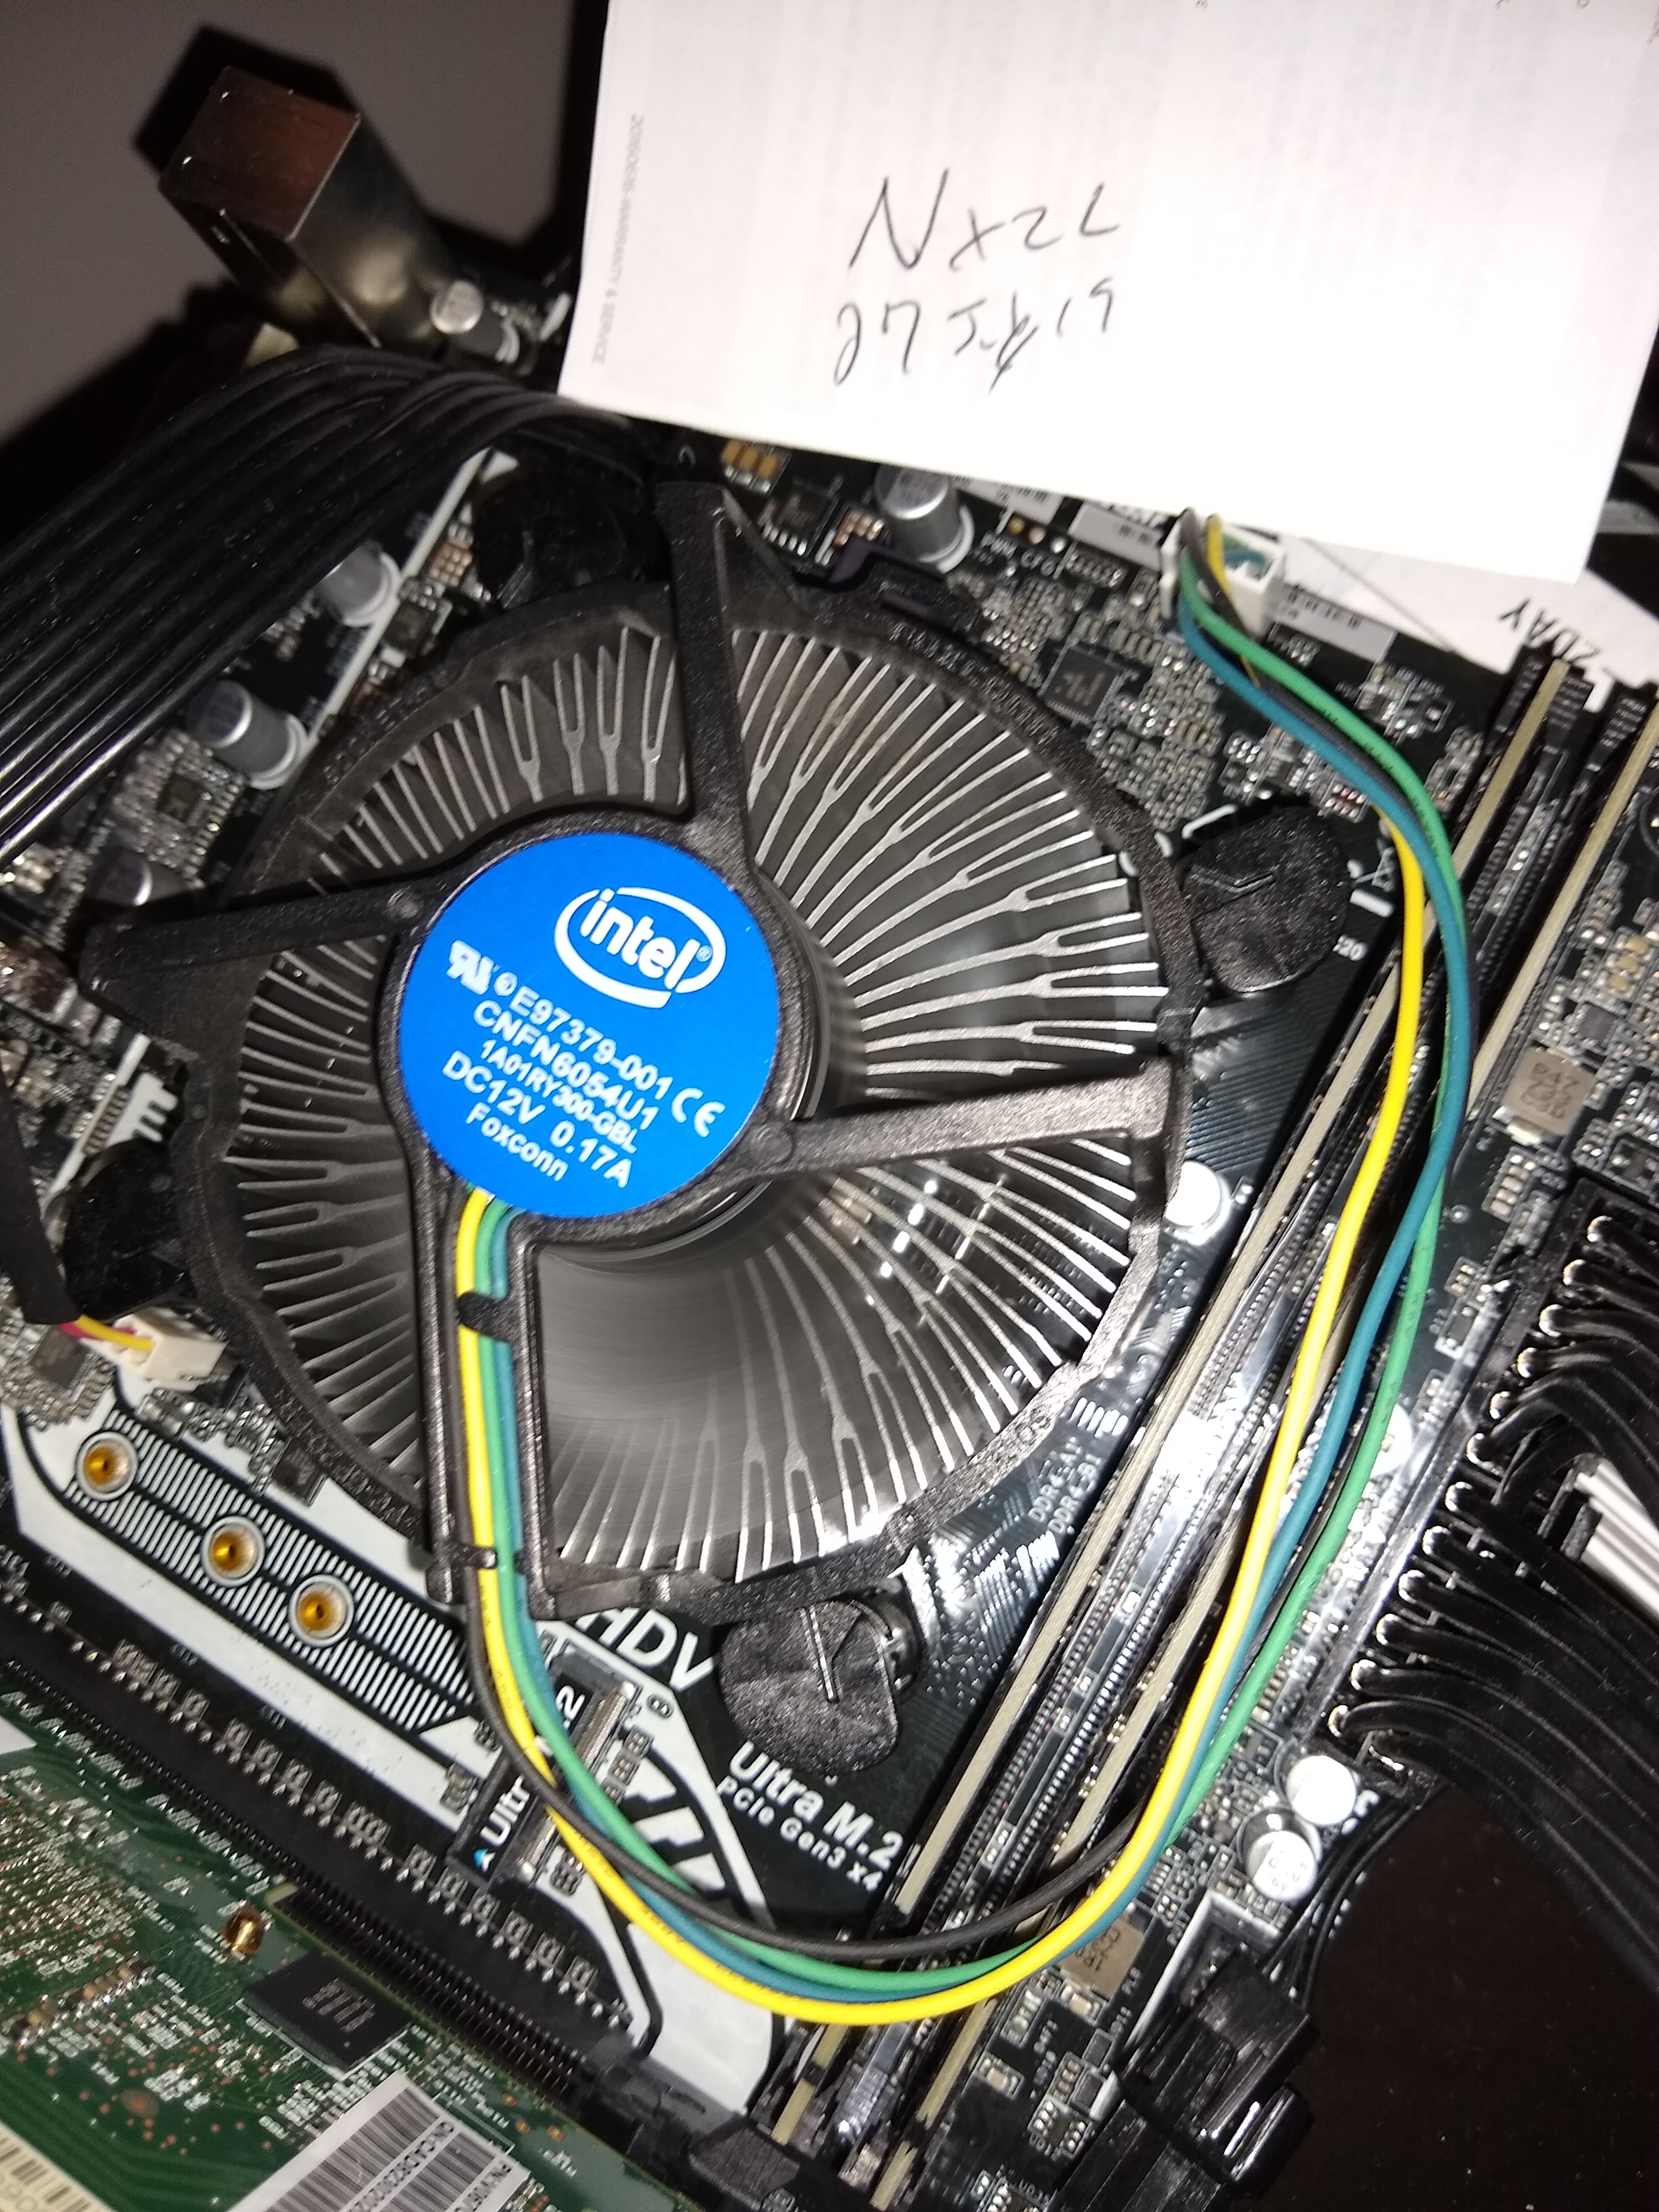 FS - Core i7 6700 and b250 MB - Buy/Sell/Trade - Level1Techs Forums